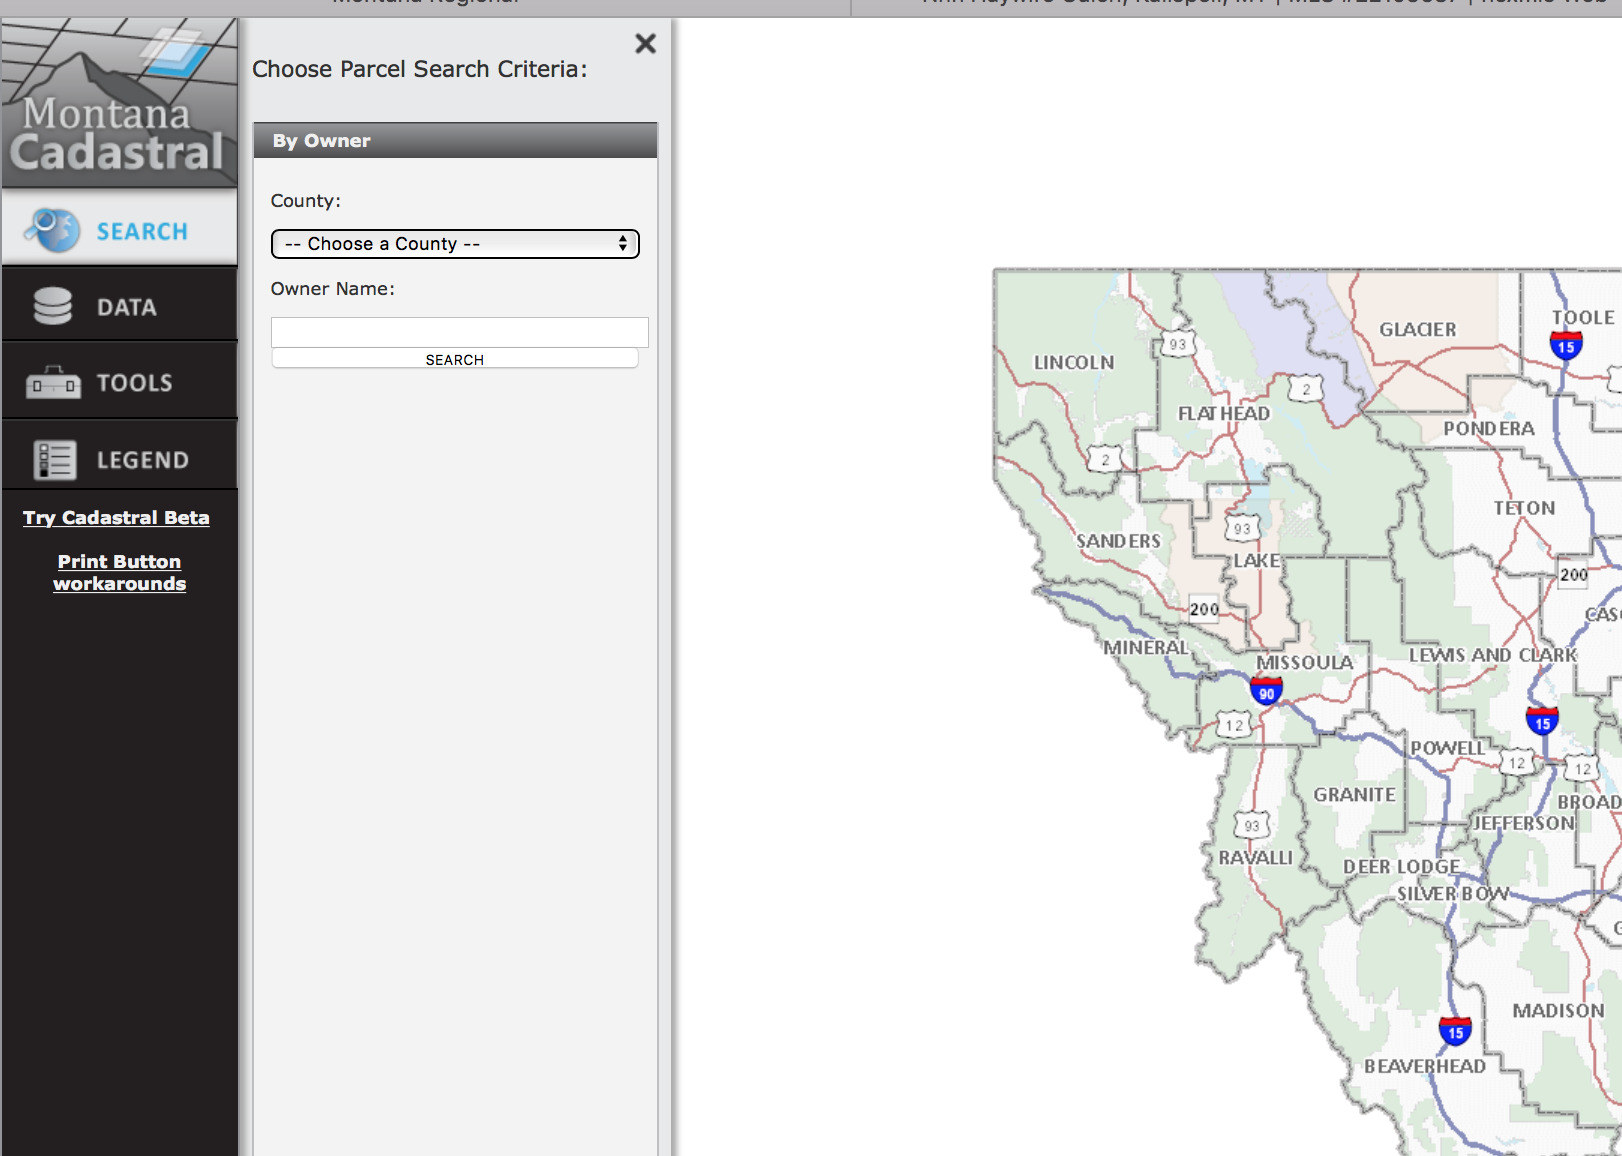 Where can I get information about a Montana property? screenshot of cadastral site.